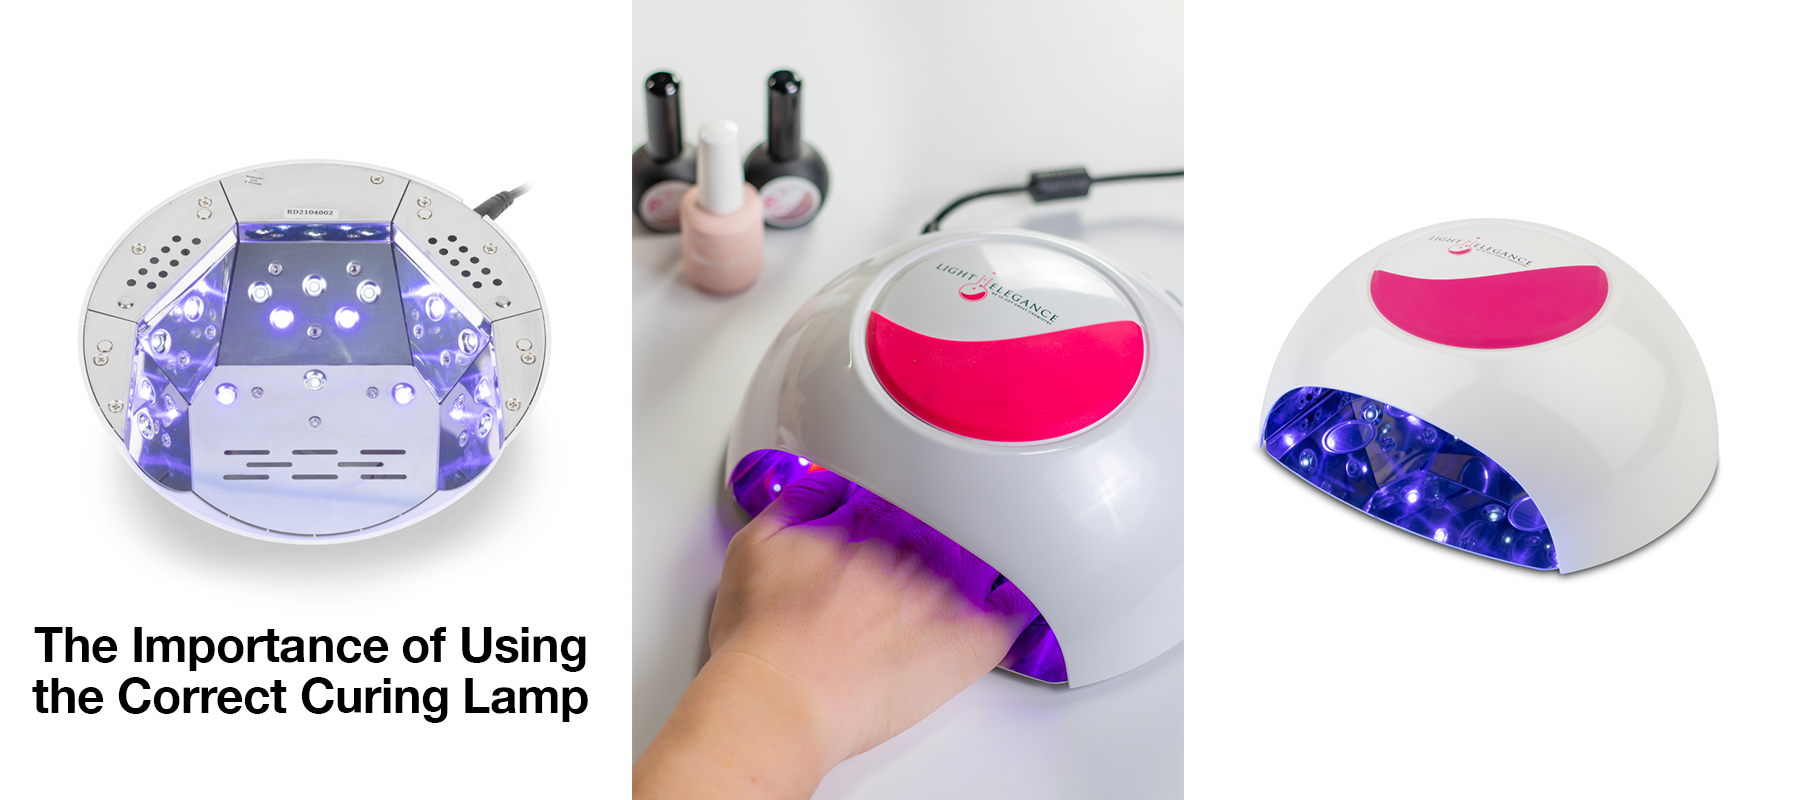 The Importance of Using the Correct Curing Lamp for Proper Curing of UV Nail Products by Doug Schoon